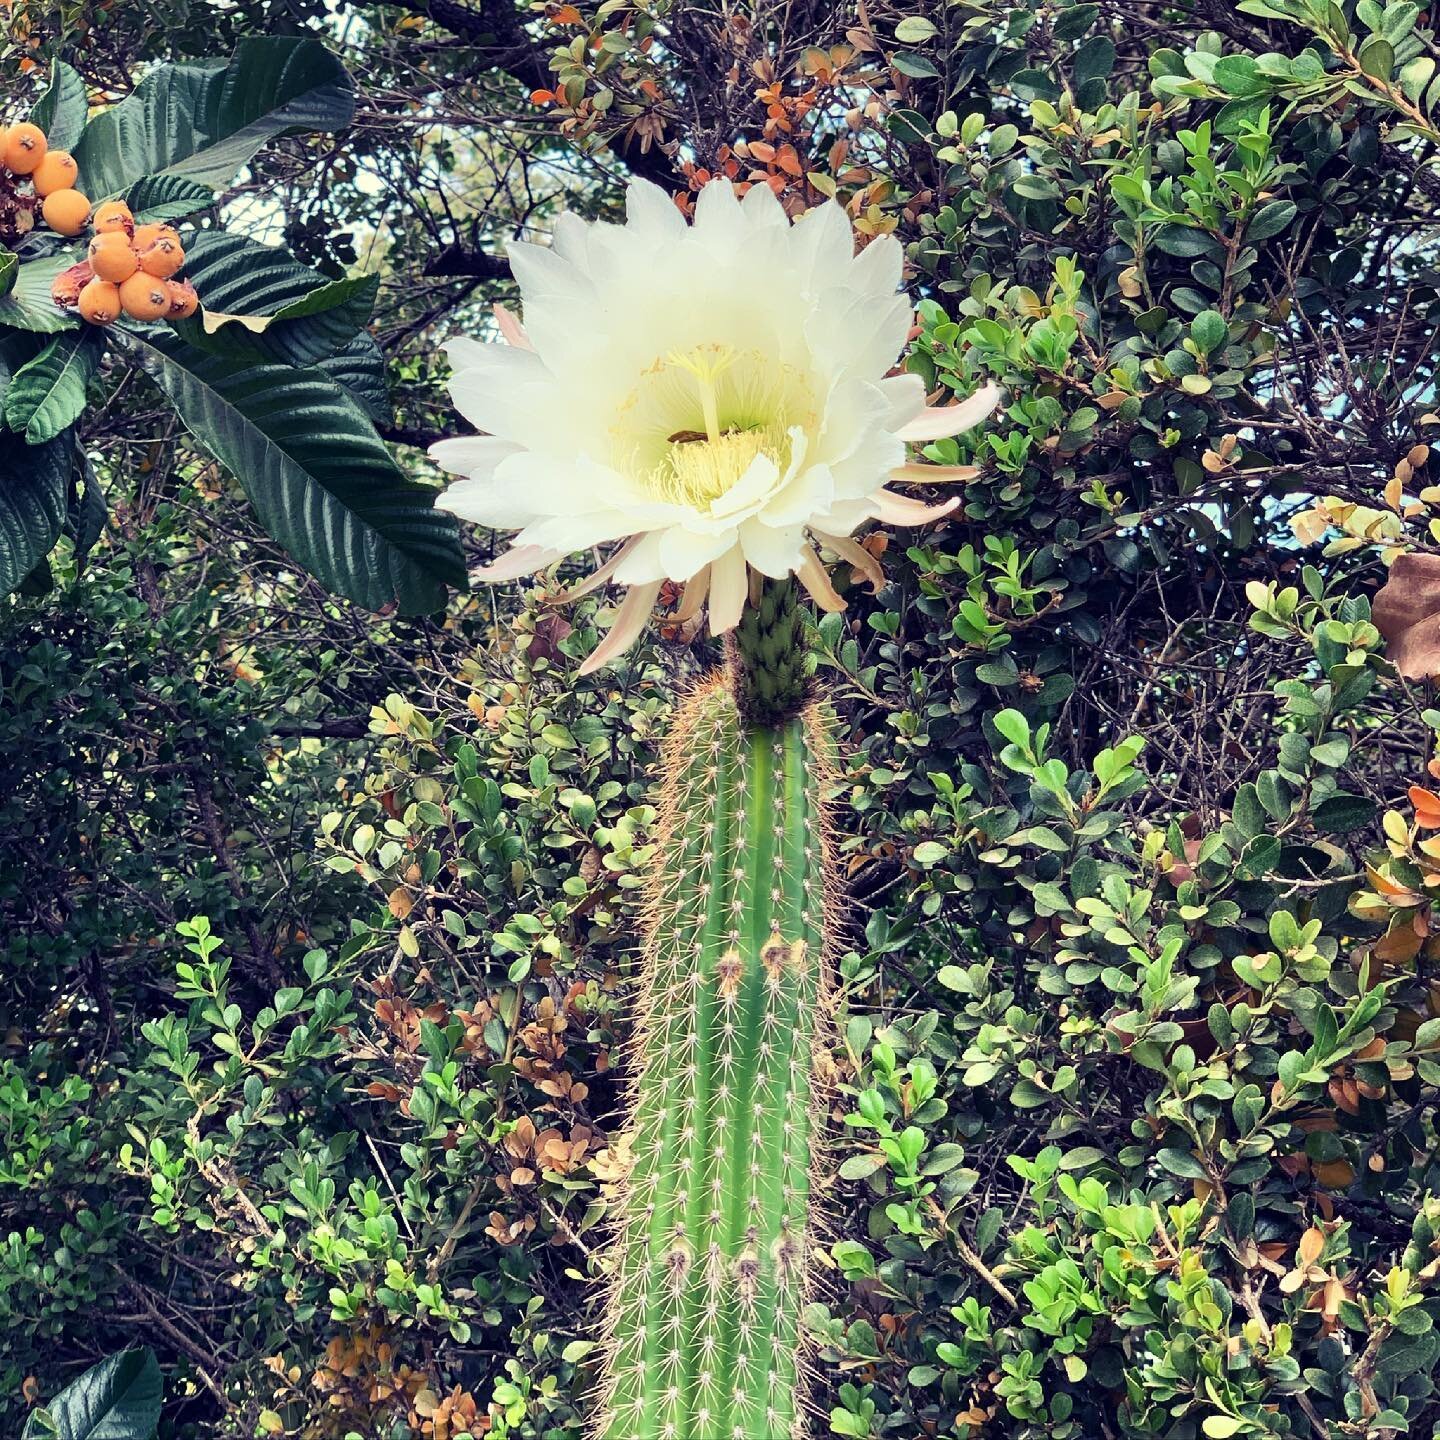 and like clockwork, the solstice arrives, + she blooms!! 

I&rsquo;m feeling a bit like this pretty cactus bloom 🌵in my front yard. The increasing 🌞 sunshine is softening my hard edges of that challenging year we just had. I&rsquo;m open + ready fo